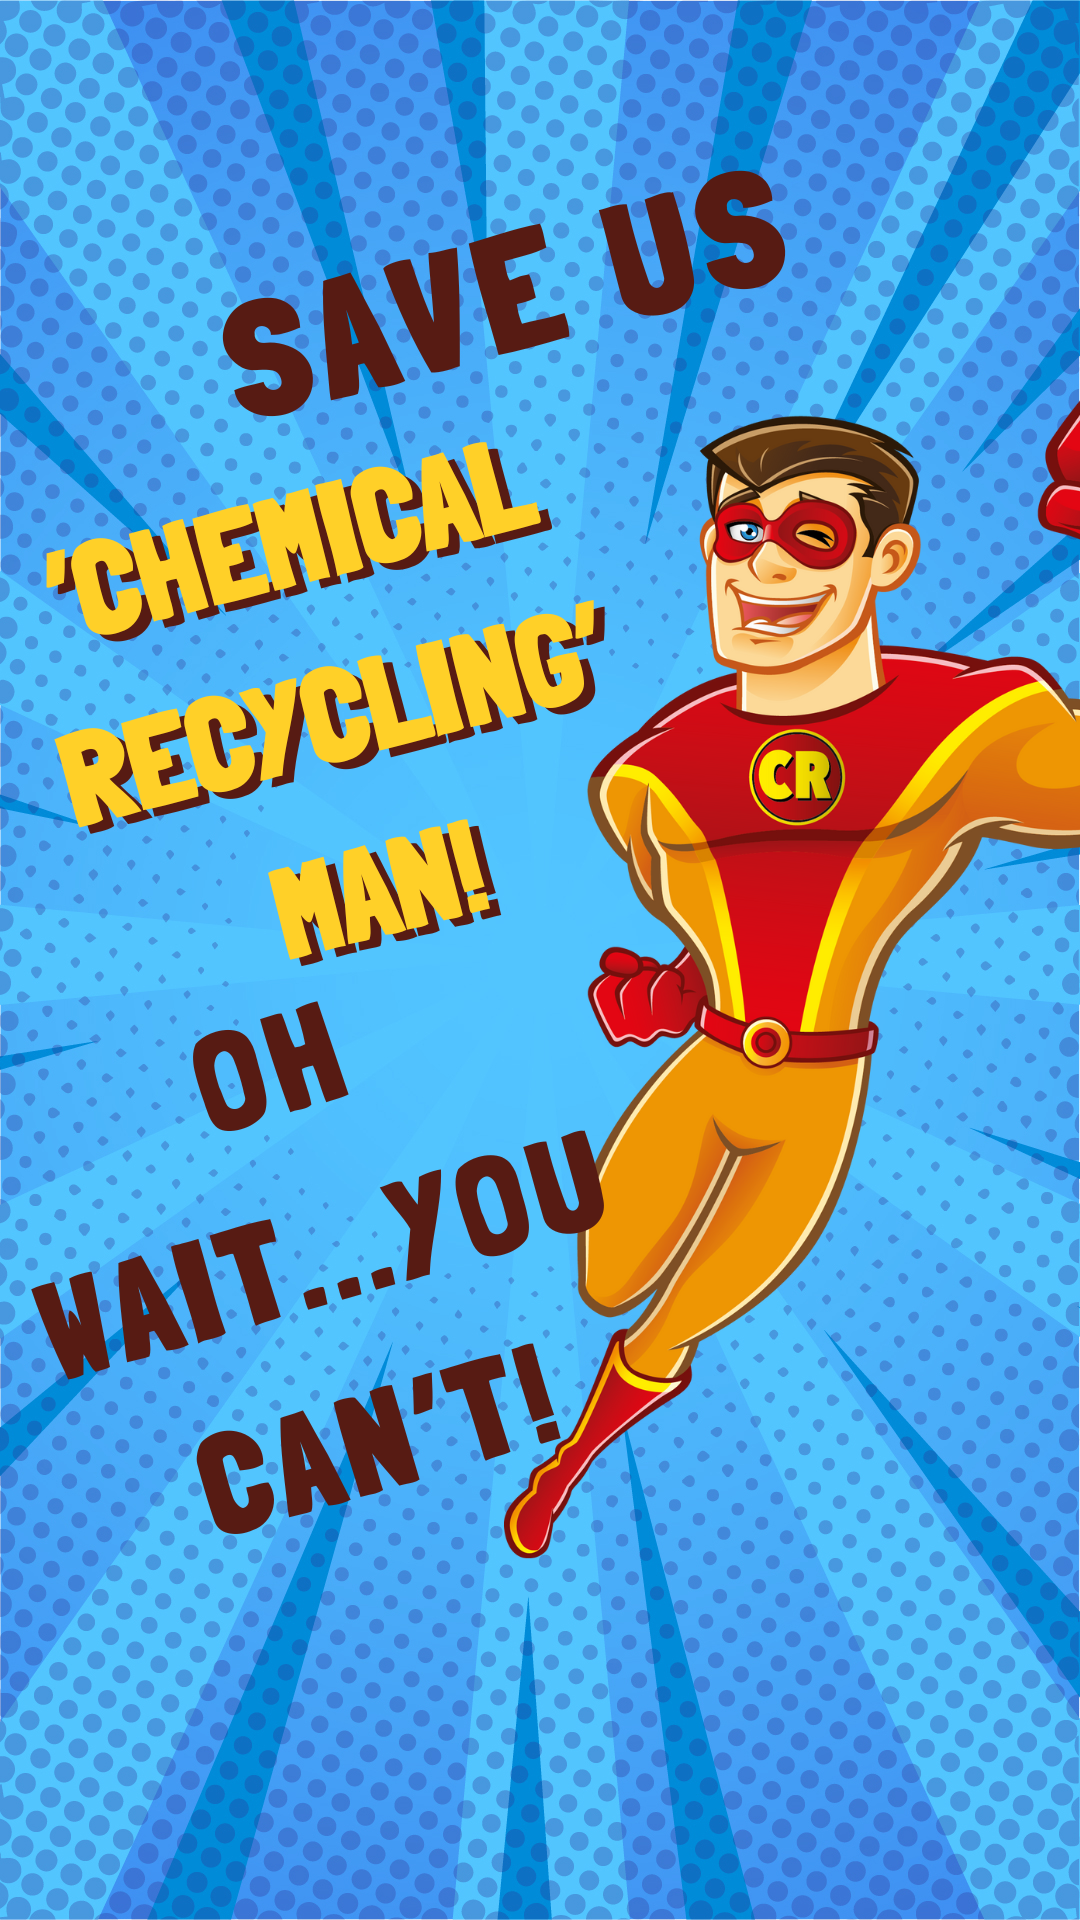 ZWE_Infographic_Save us Chemical Recycling Man! Oh wait...you can't